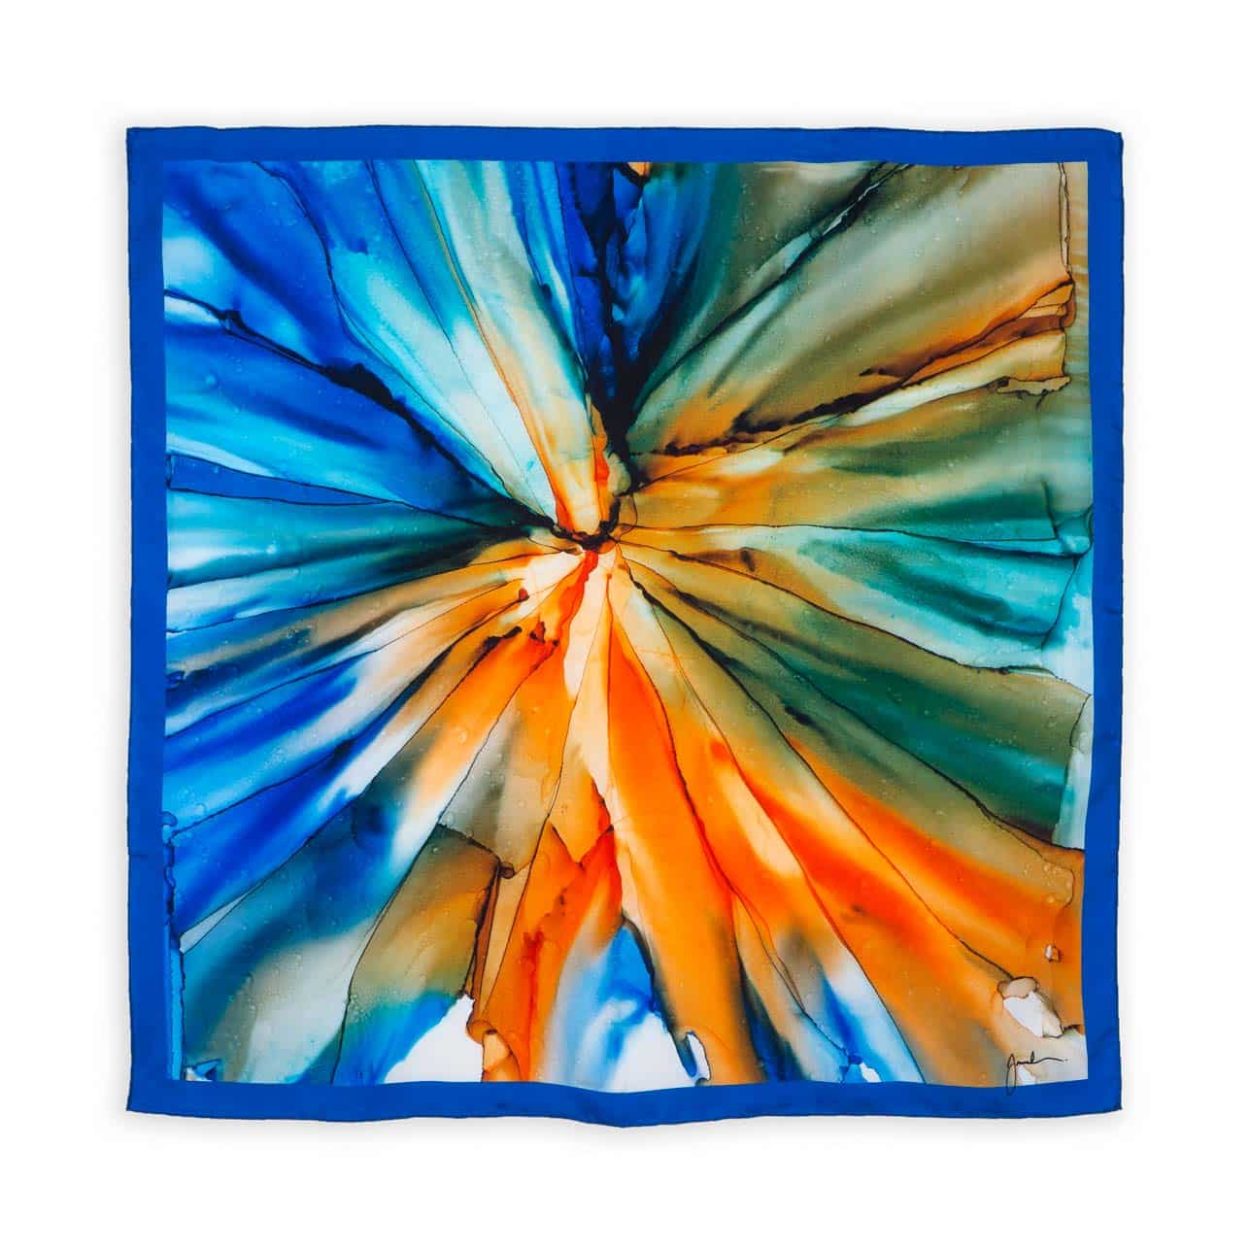 Large square scarf with blue and orange fluid art print